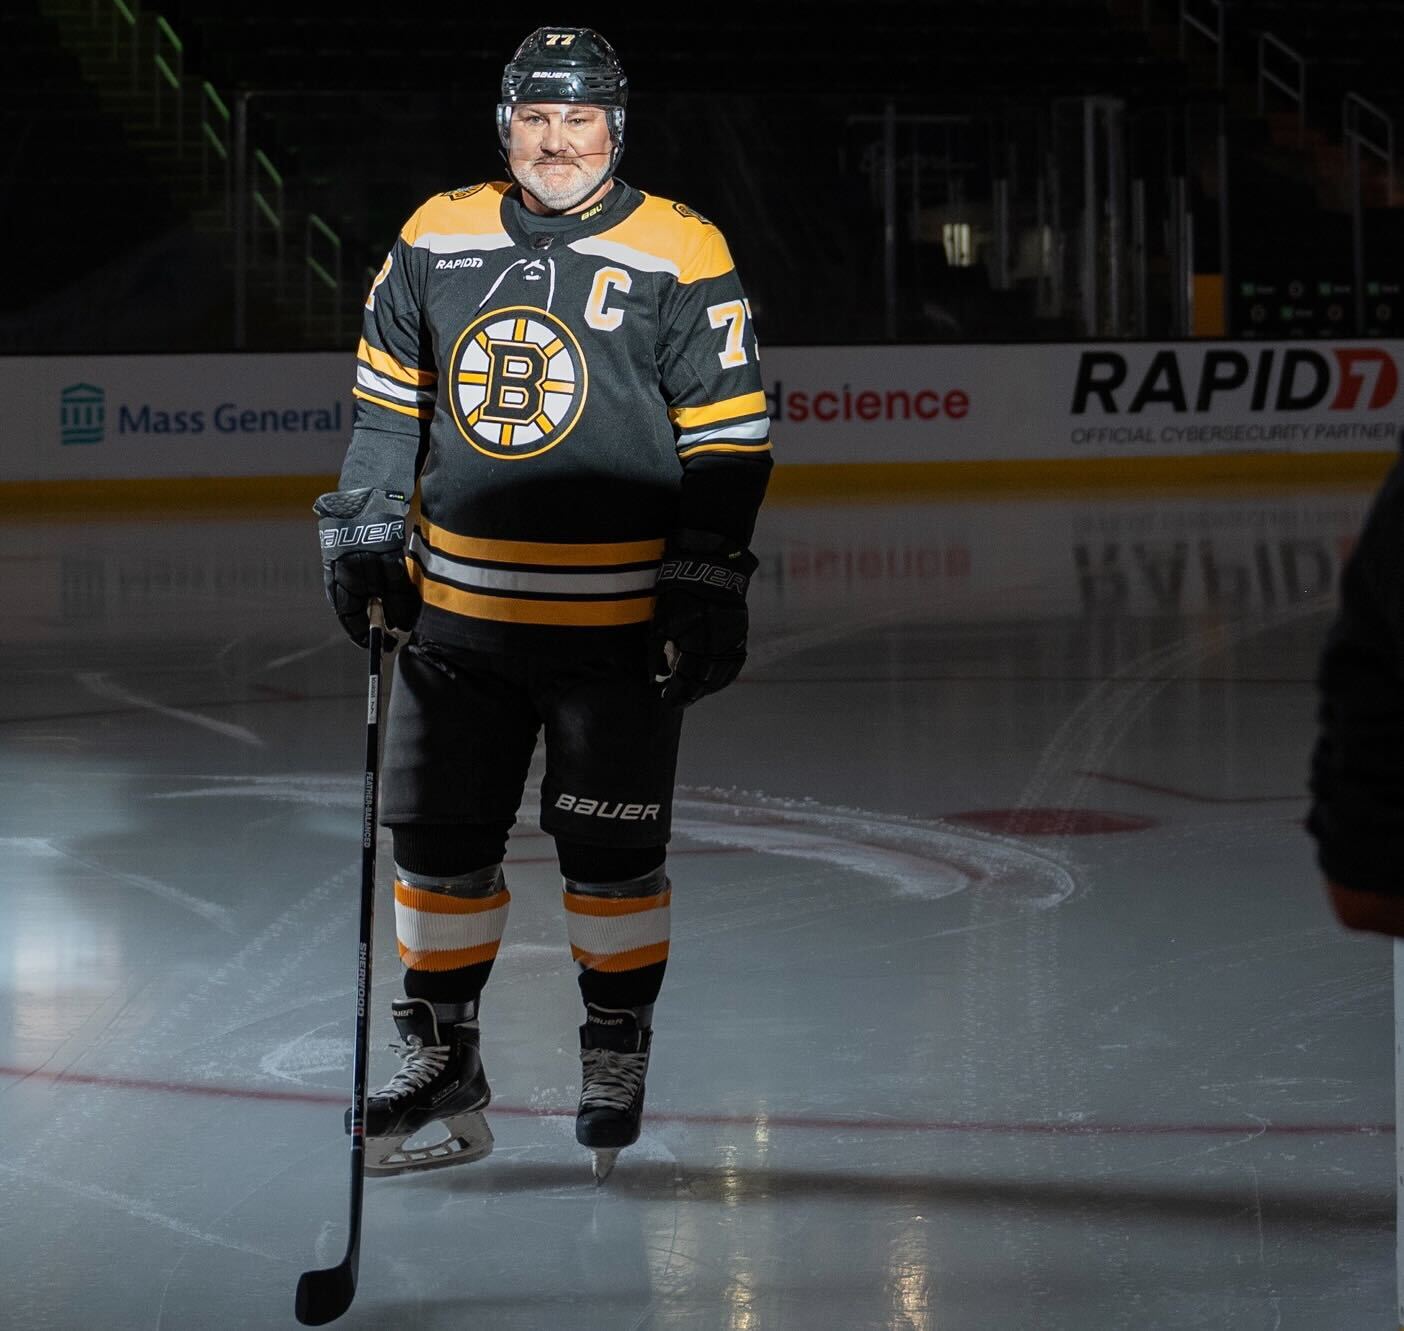 7 Rapid Questions with #77 Ray Bourque